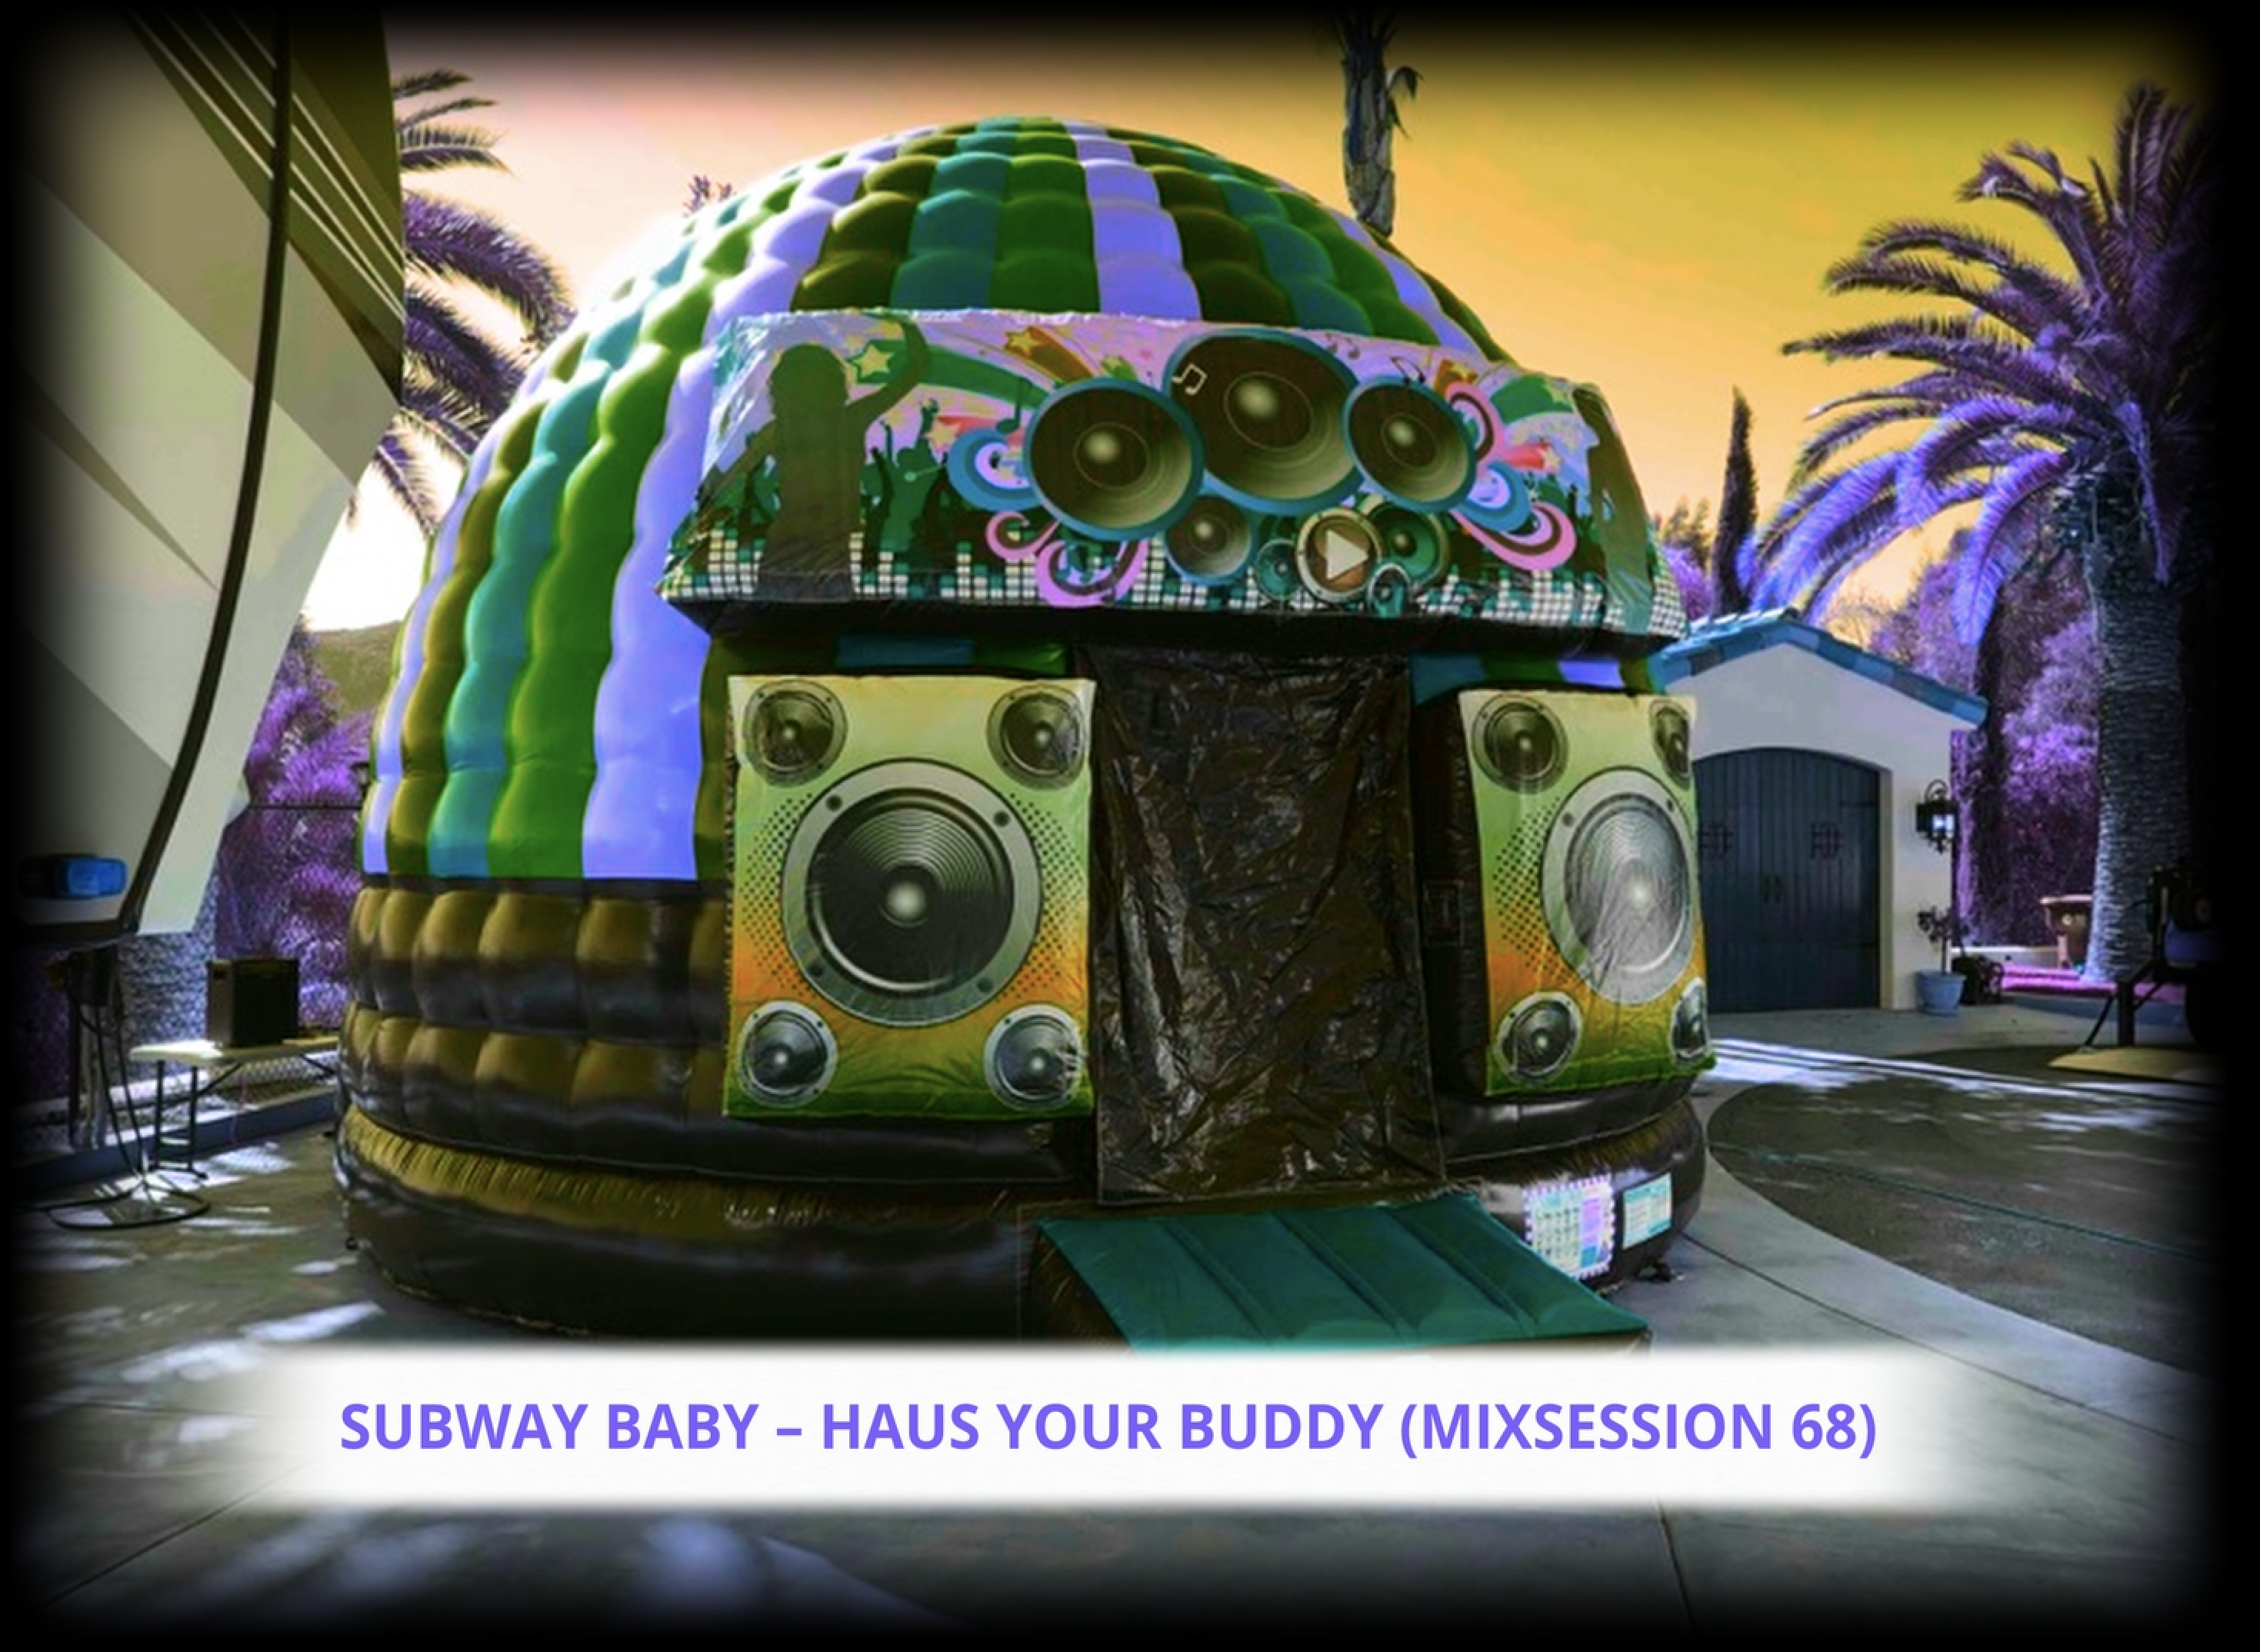 Subway Baby-Haus Your Buddy (Mixsession 68)